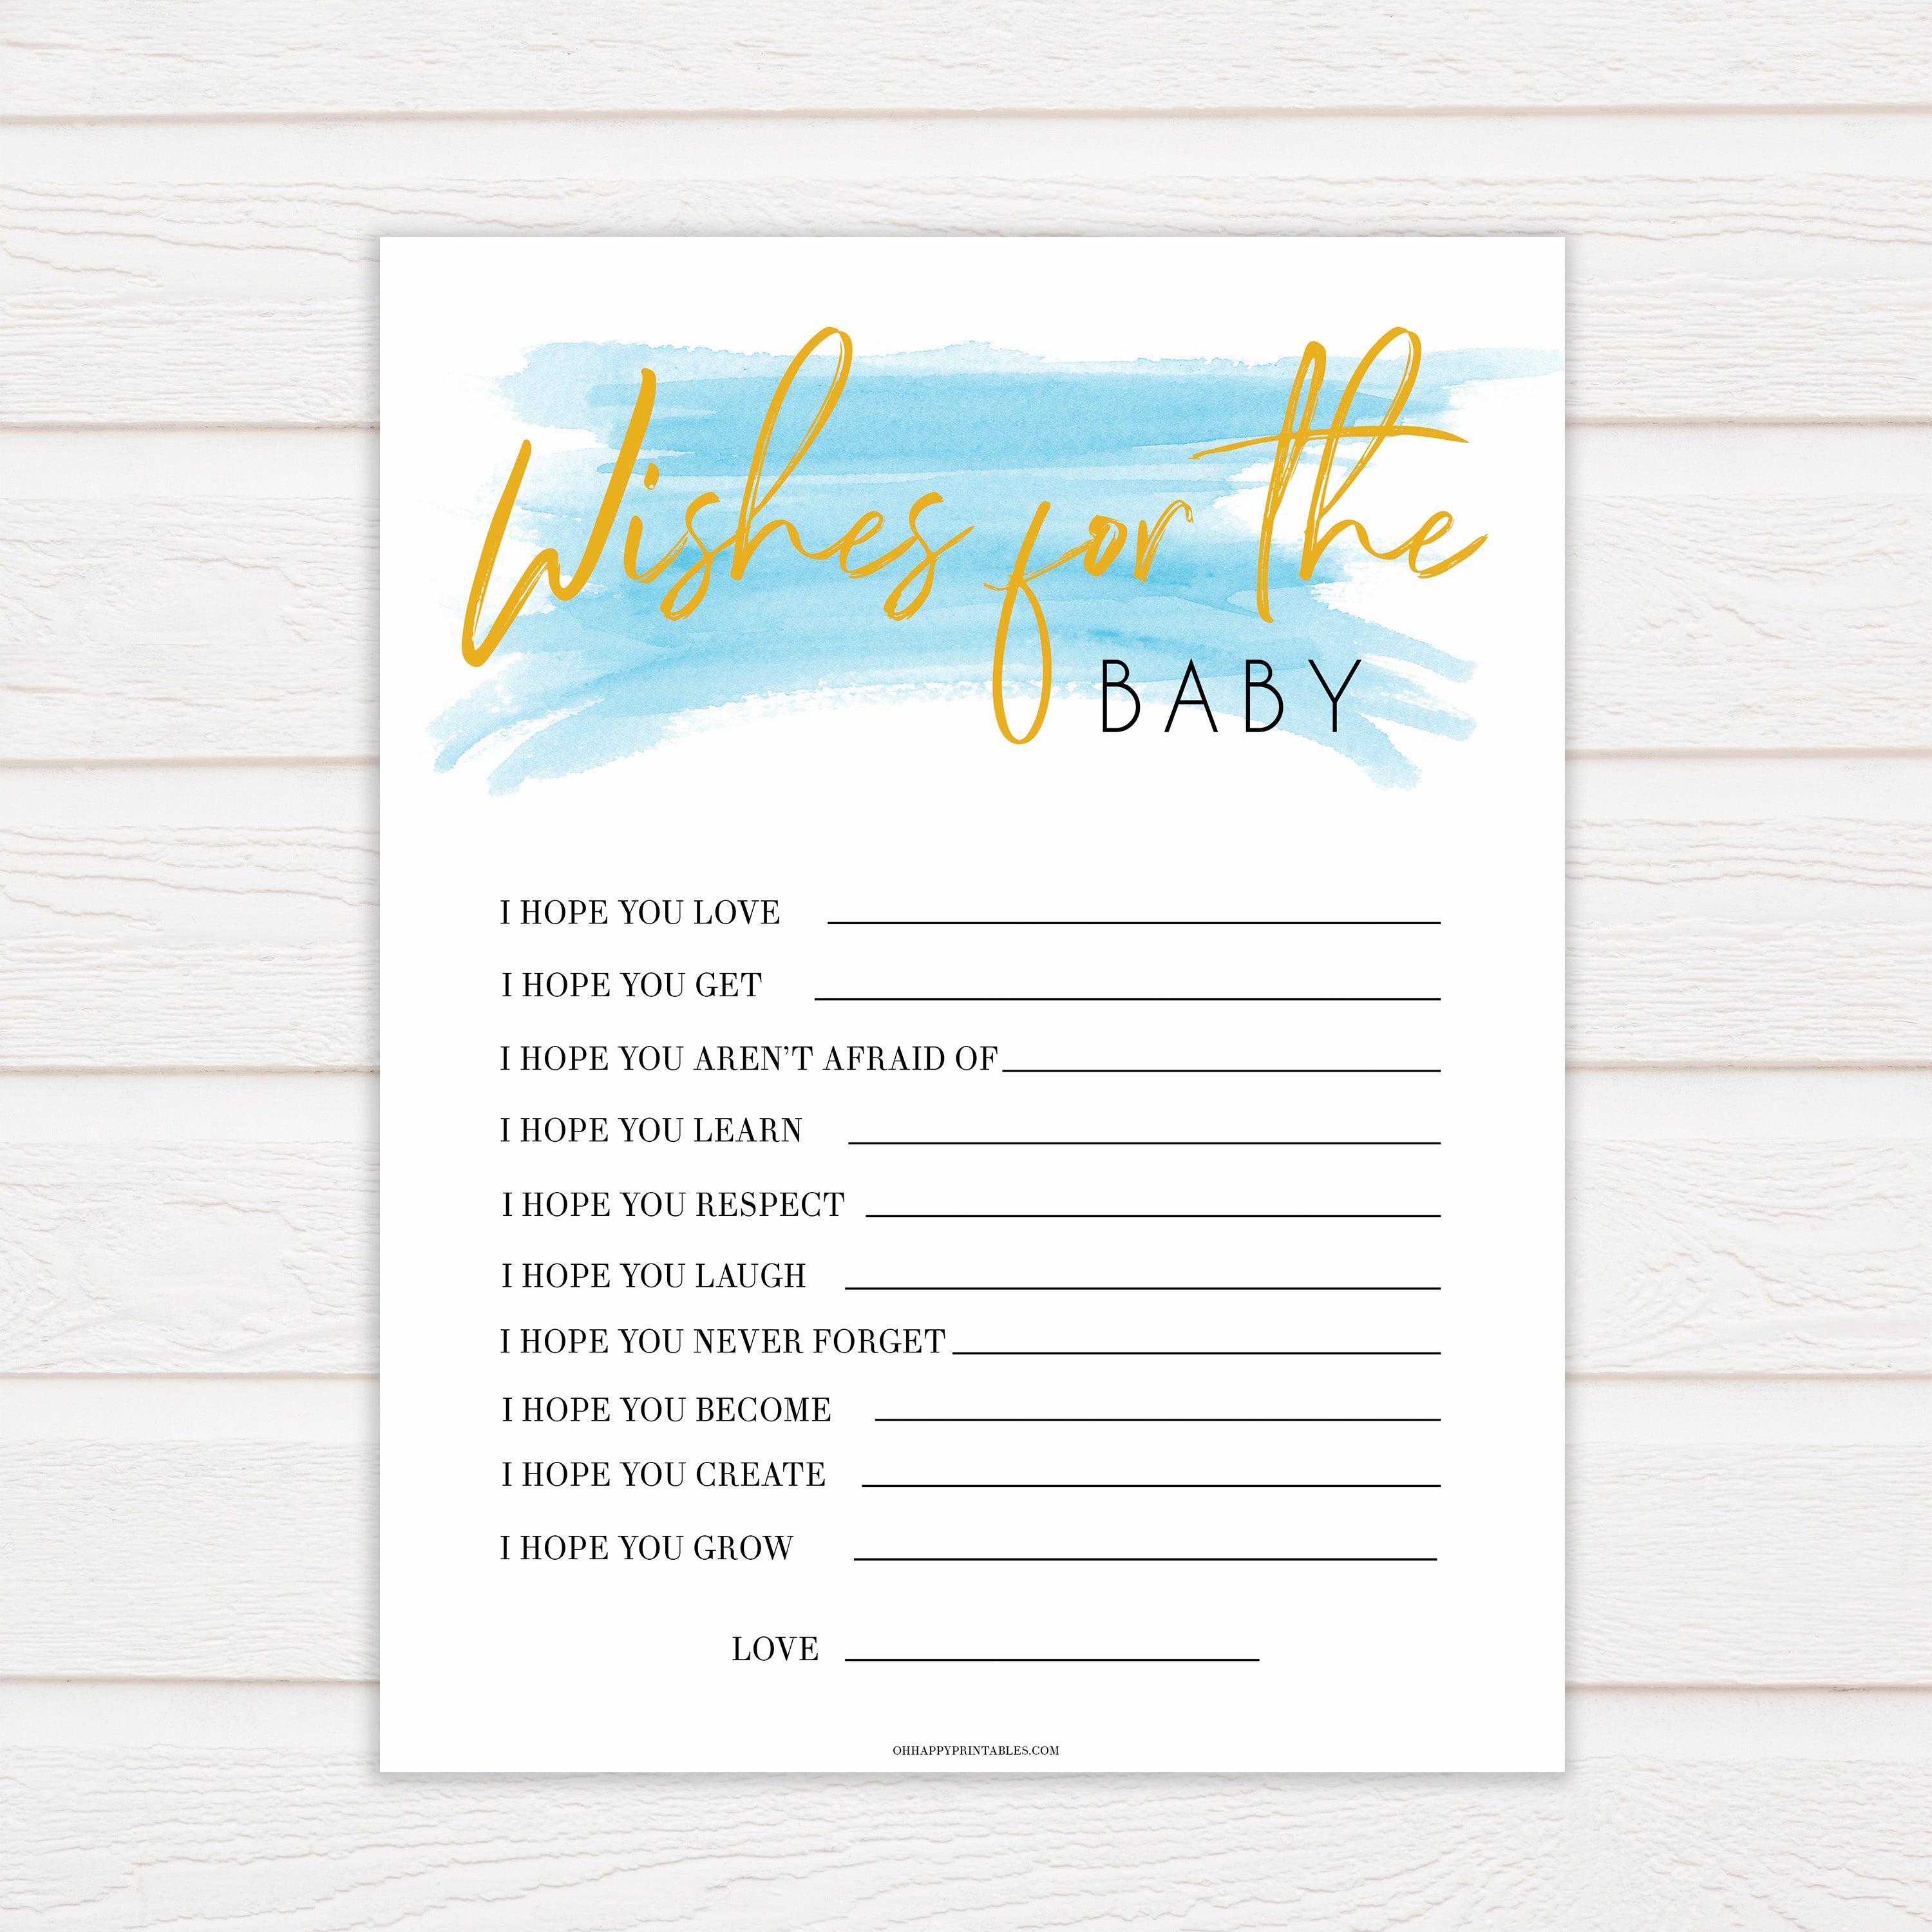 Blue swash, wishes for the baby baby games, baby shower games, printable baby games, fun baby games, boy baby shower games, baby games, fun baby shower ideas, baby shower ideas, boy baby games, blue baby shower